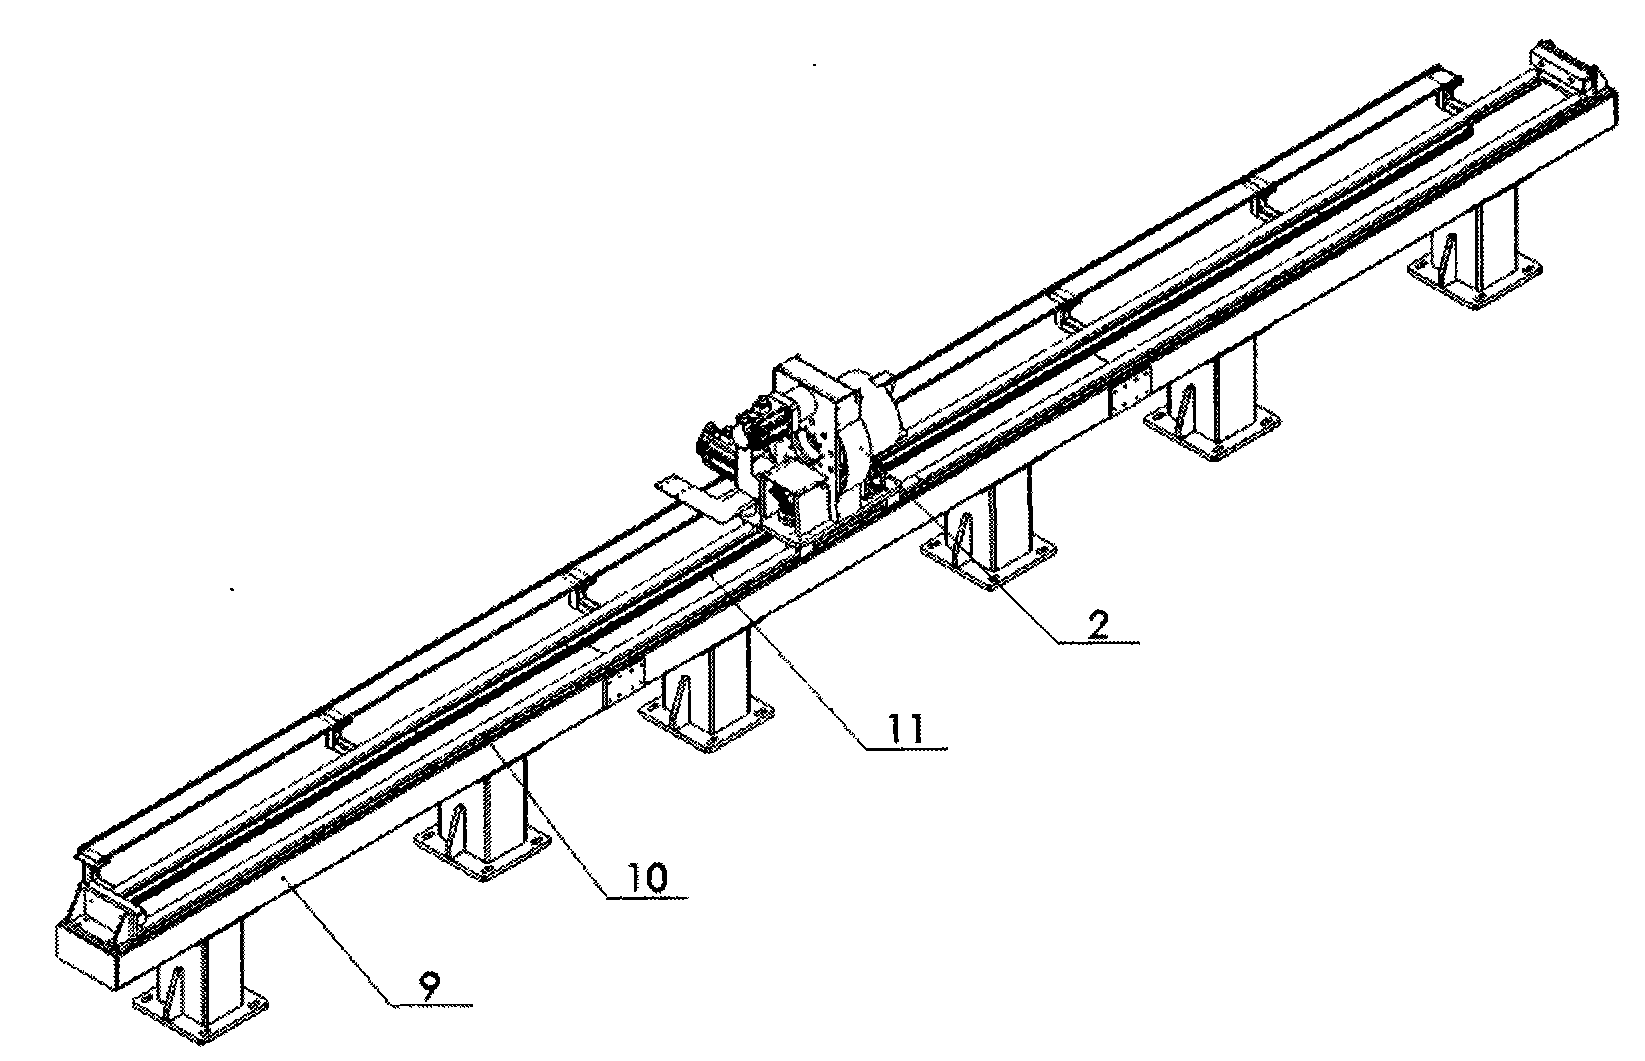 Full-automatic single-tube pin welding device